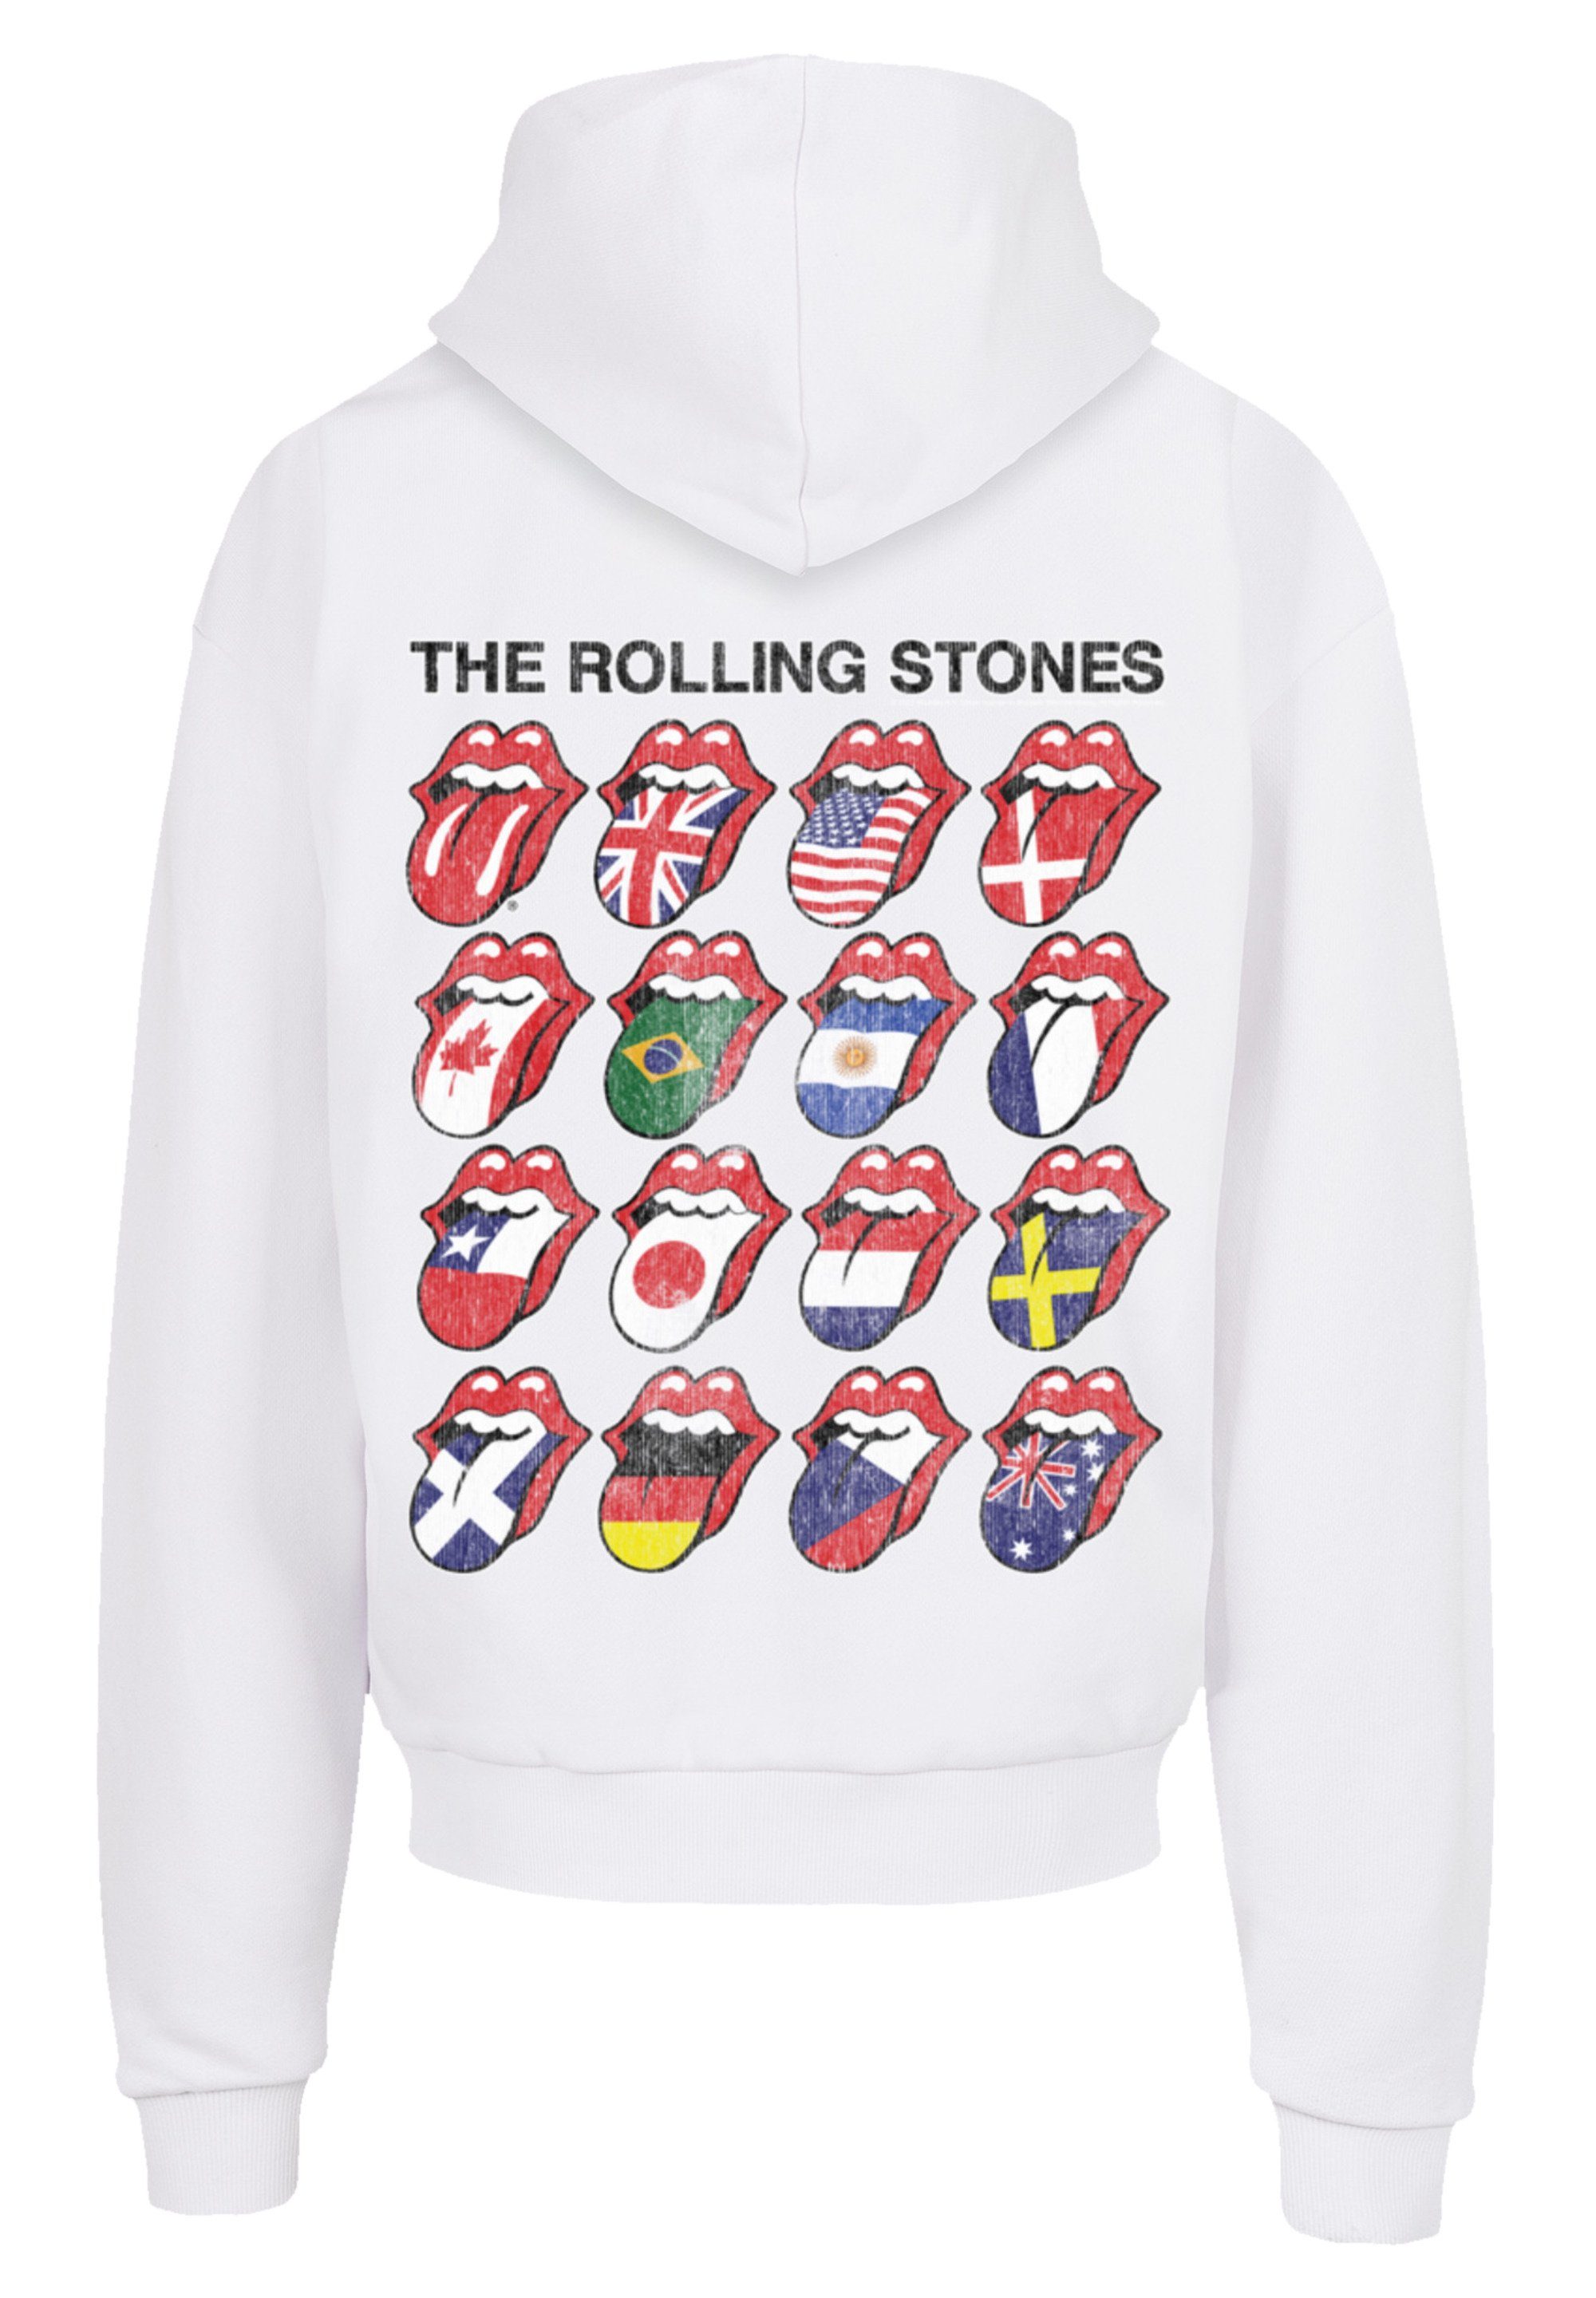 F4NT4STIC Kapuzenpullover Logo, Lounge Stones Rolling Stones Tongues The Offiziell Hoodie The Voodoo Musik, Rolling Band, lizenzierter